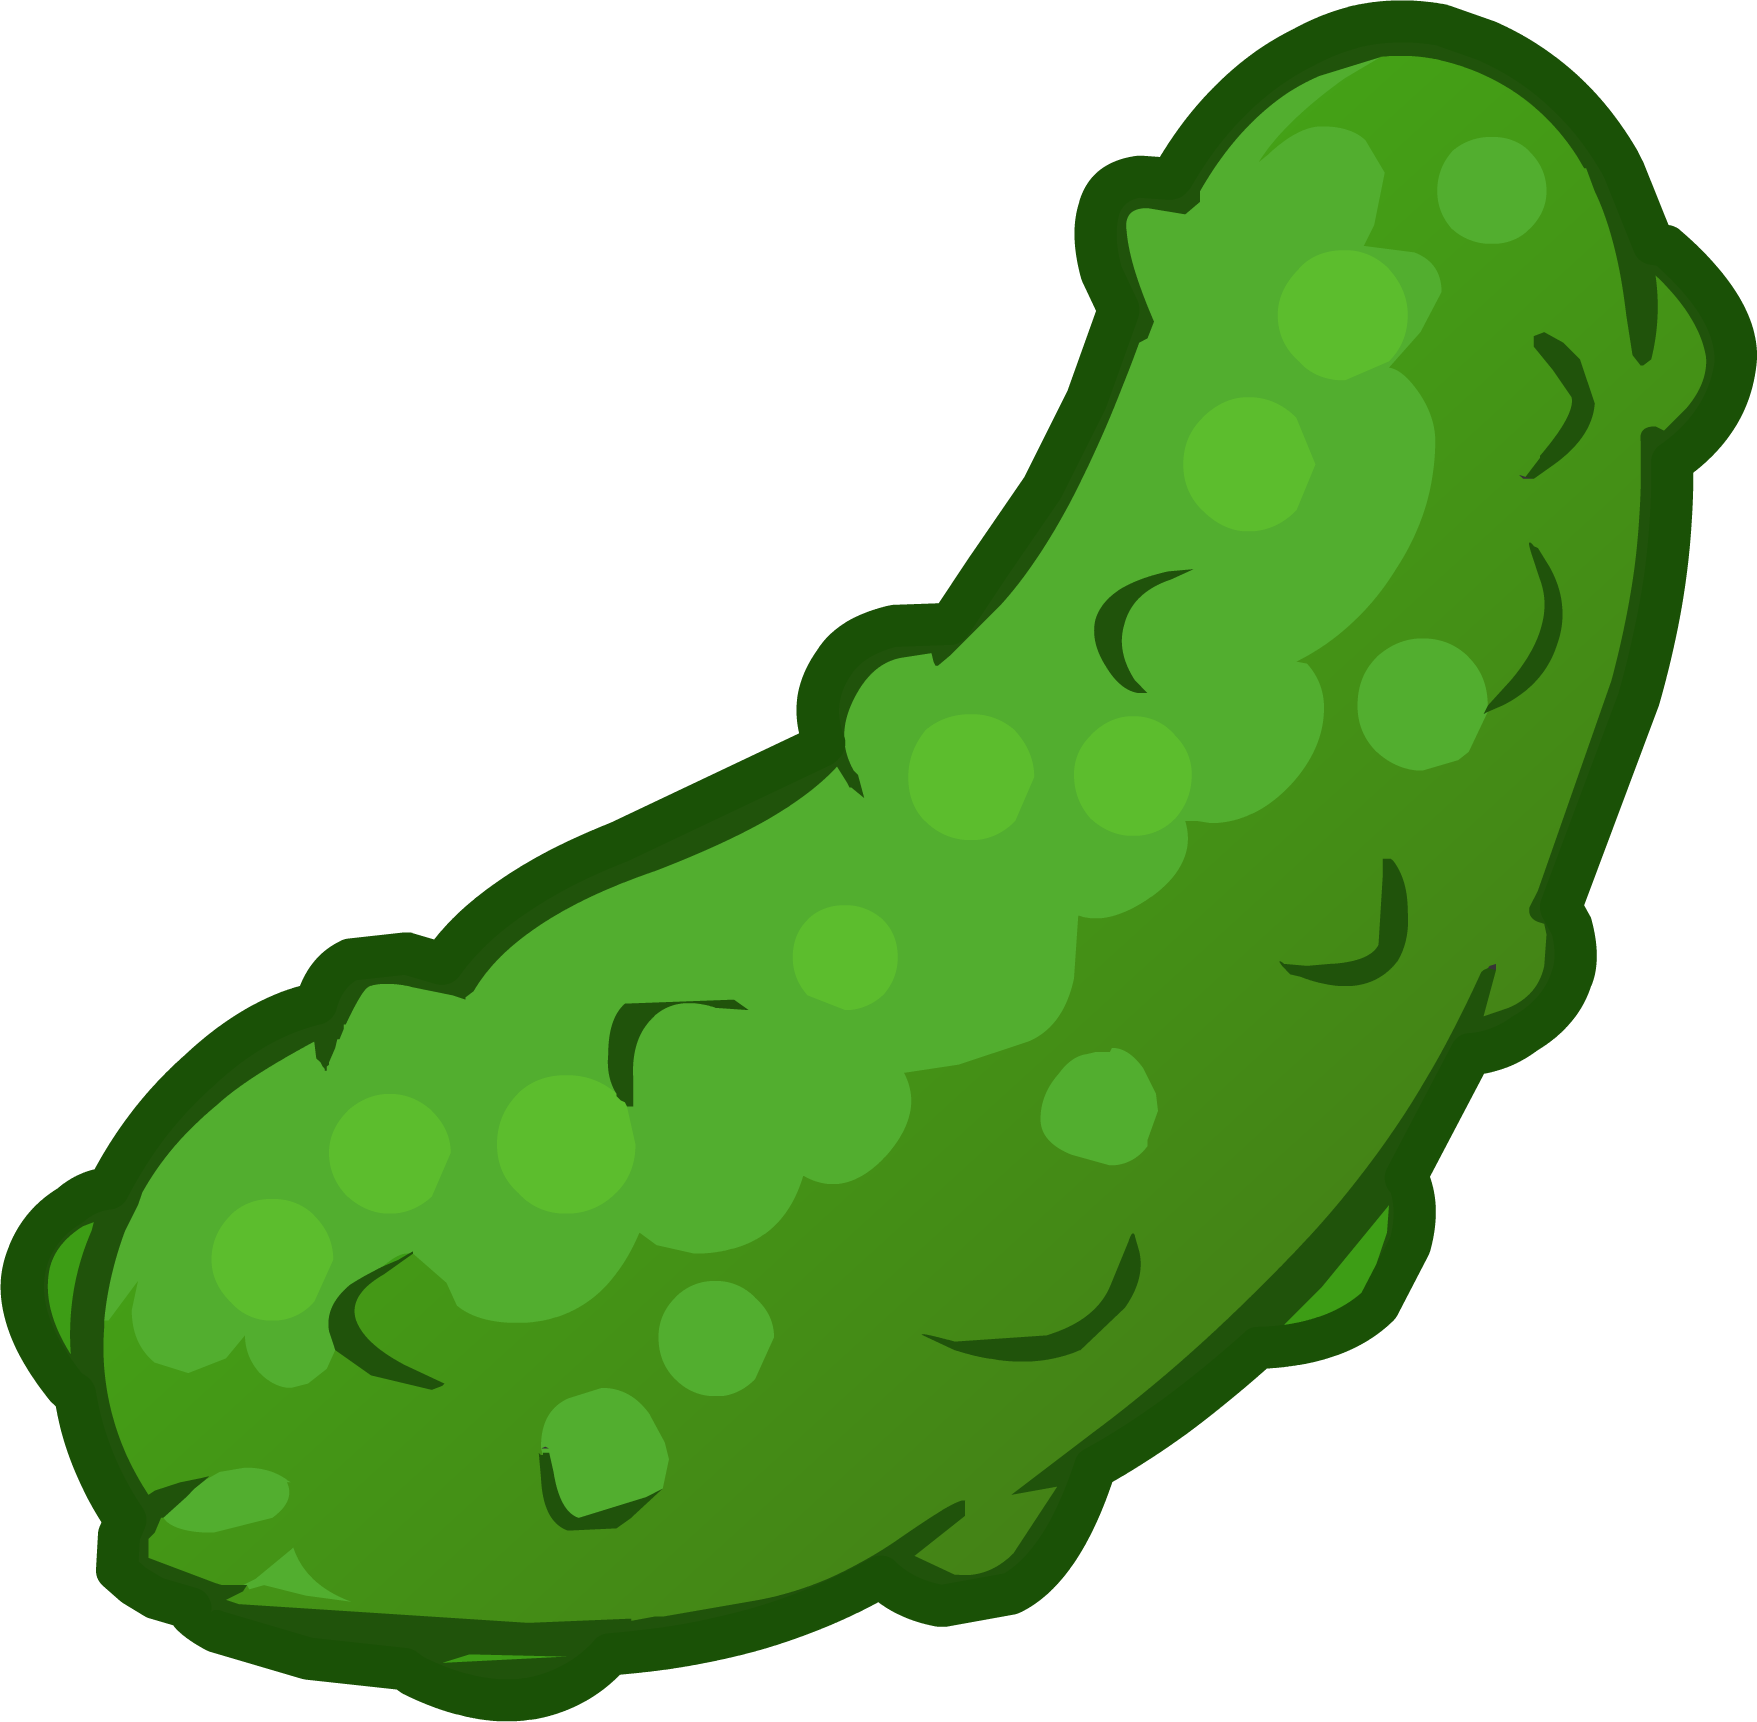 Pickle.png - Pickle, Transparent background PNG HD thumbnail